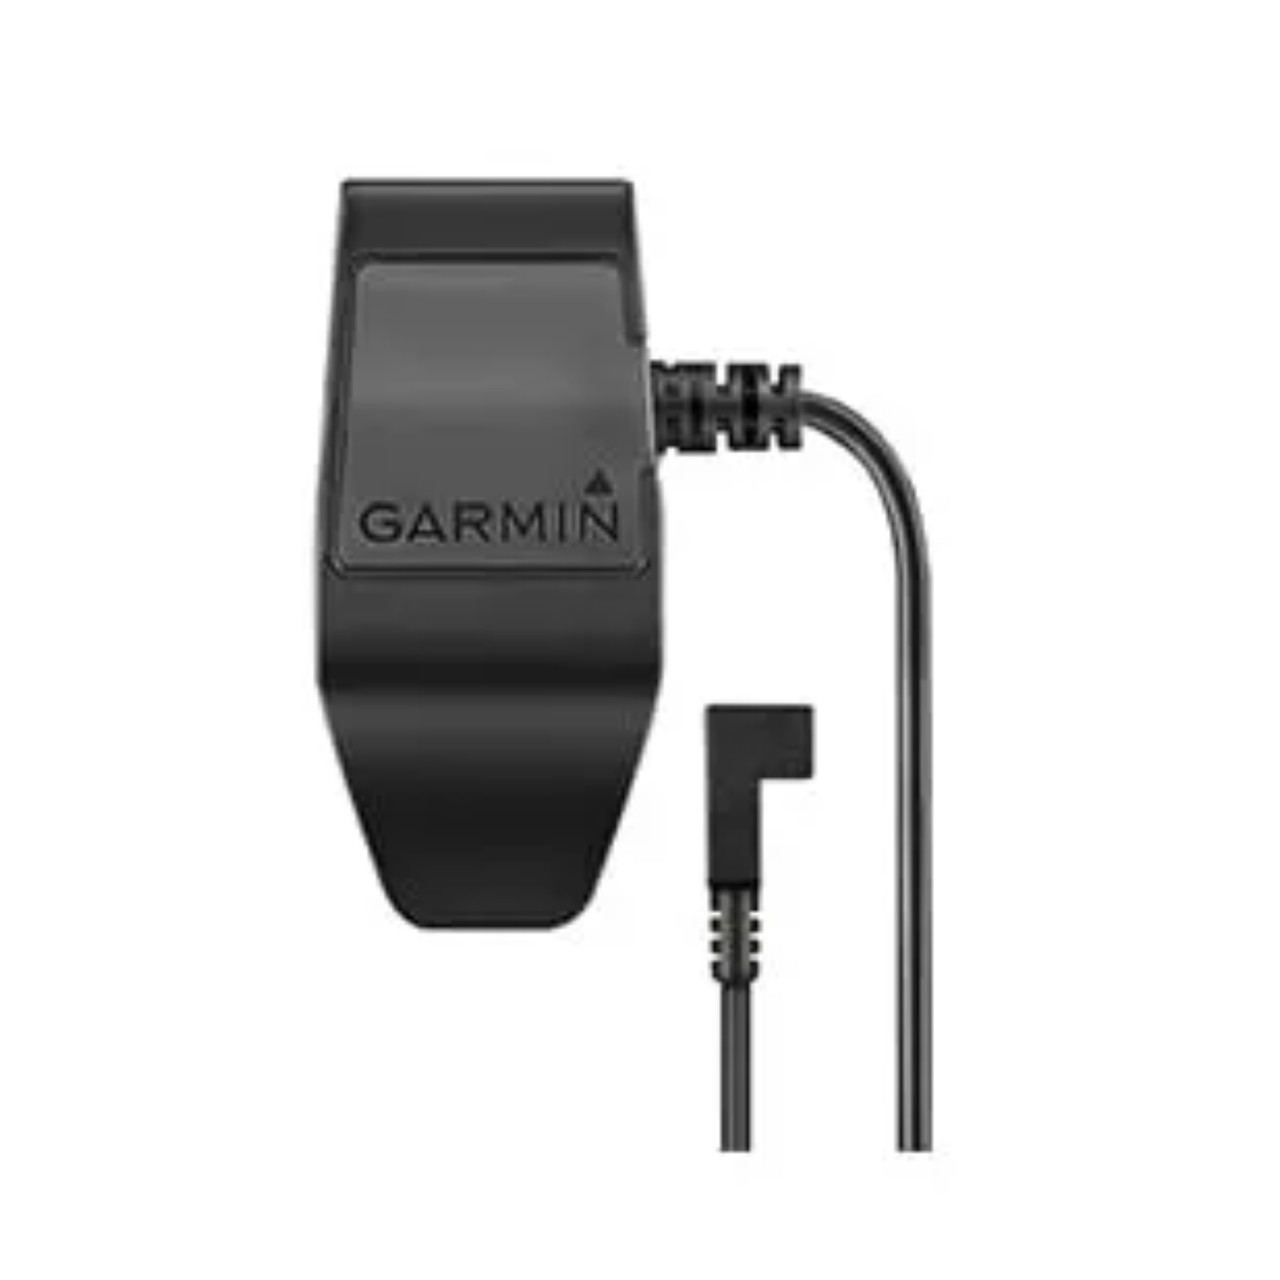 Garmin New OEM Charging Cable, 010-11828-20